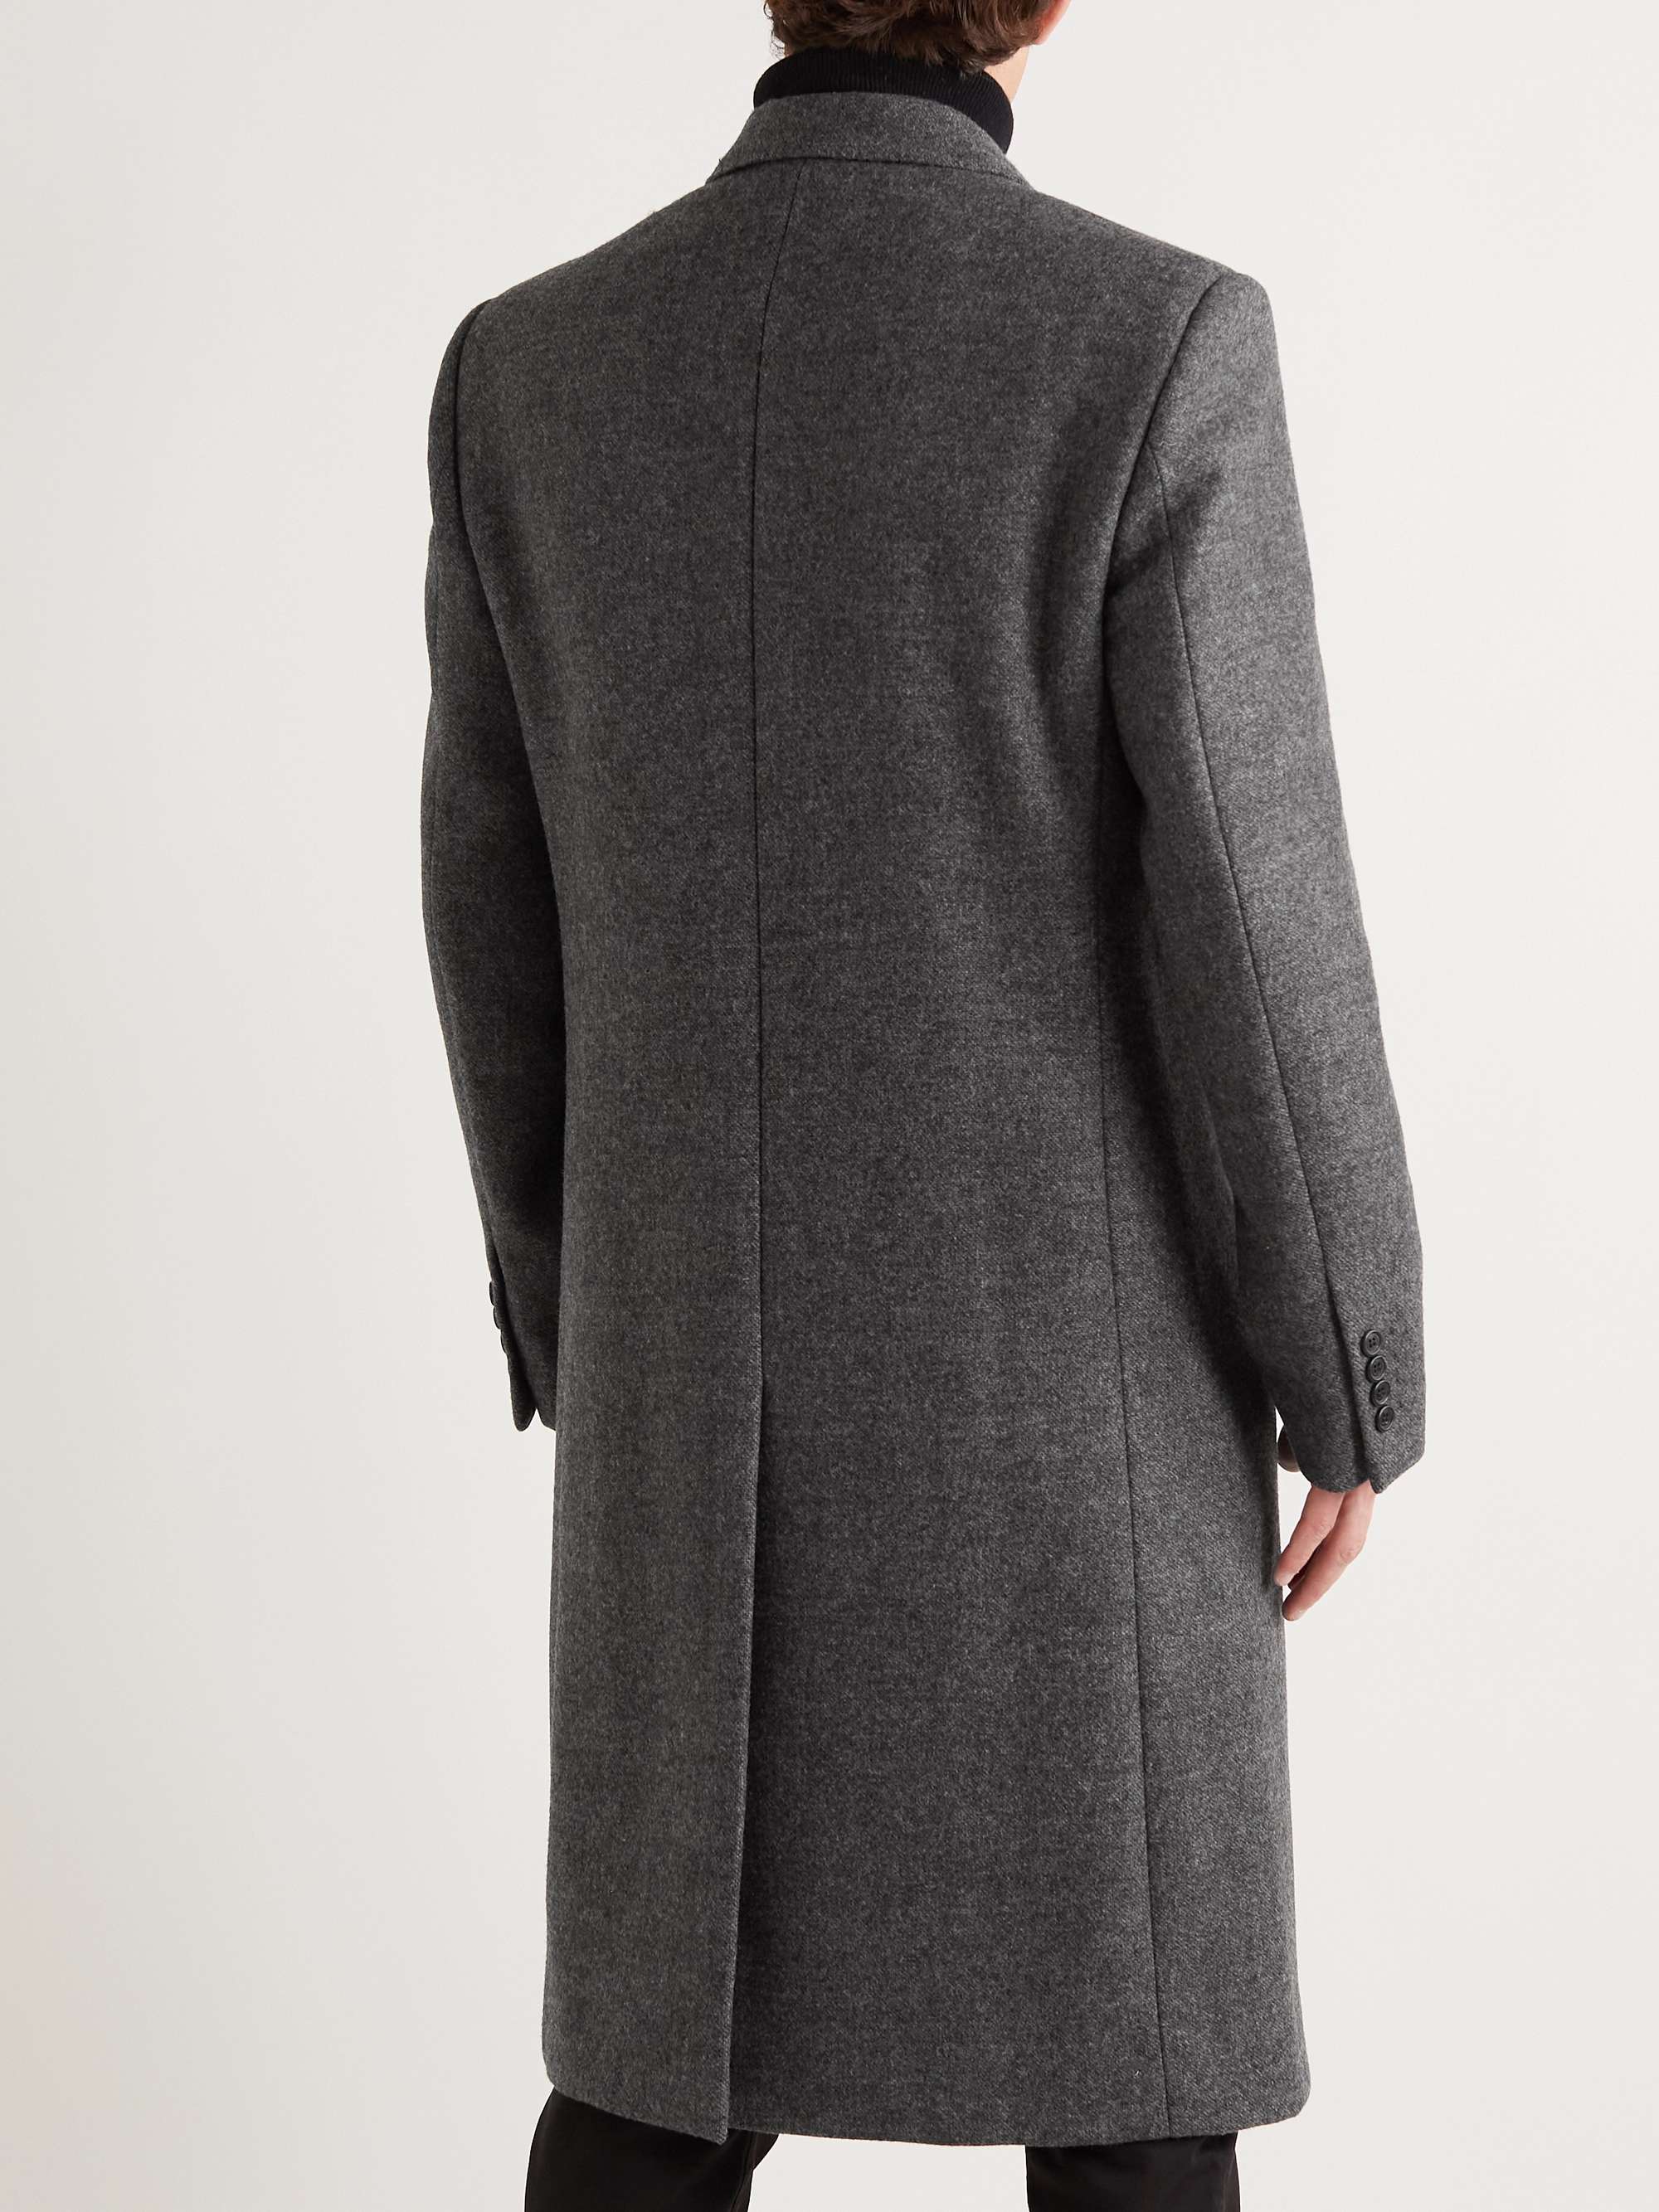 DUNHILL Wool Coat